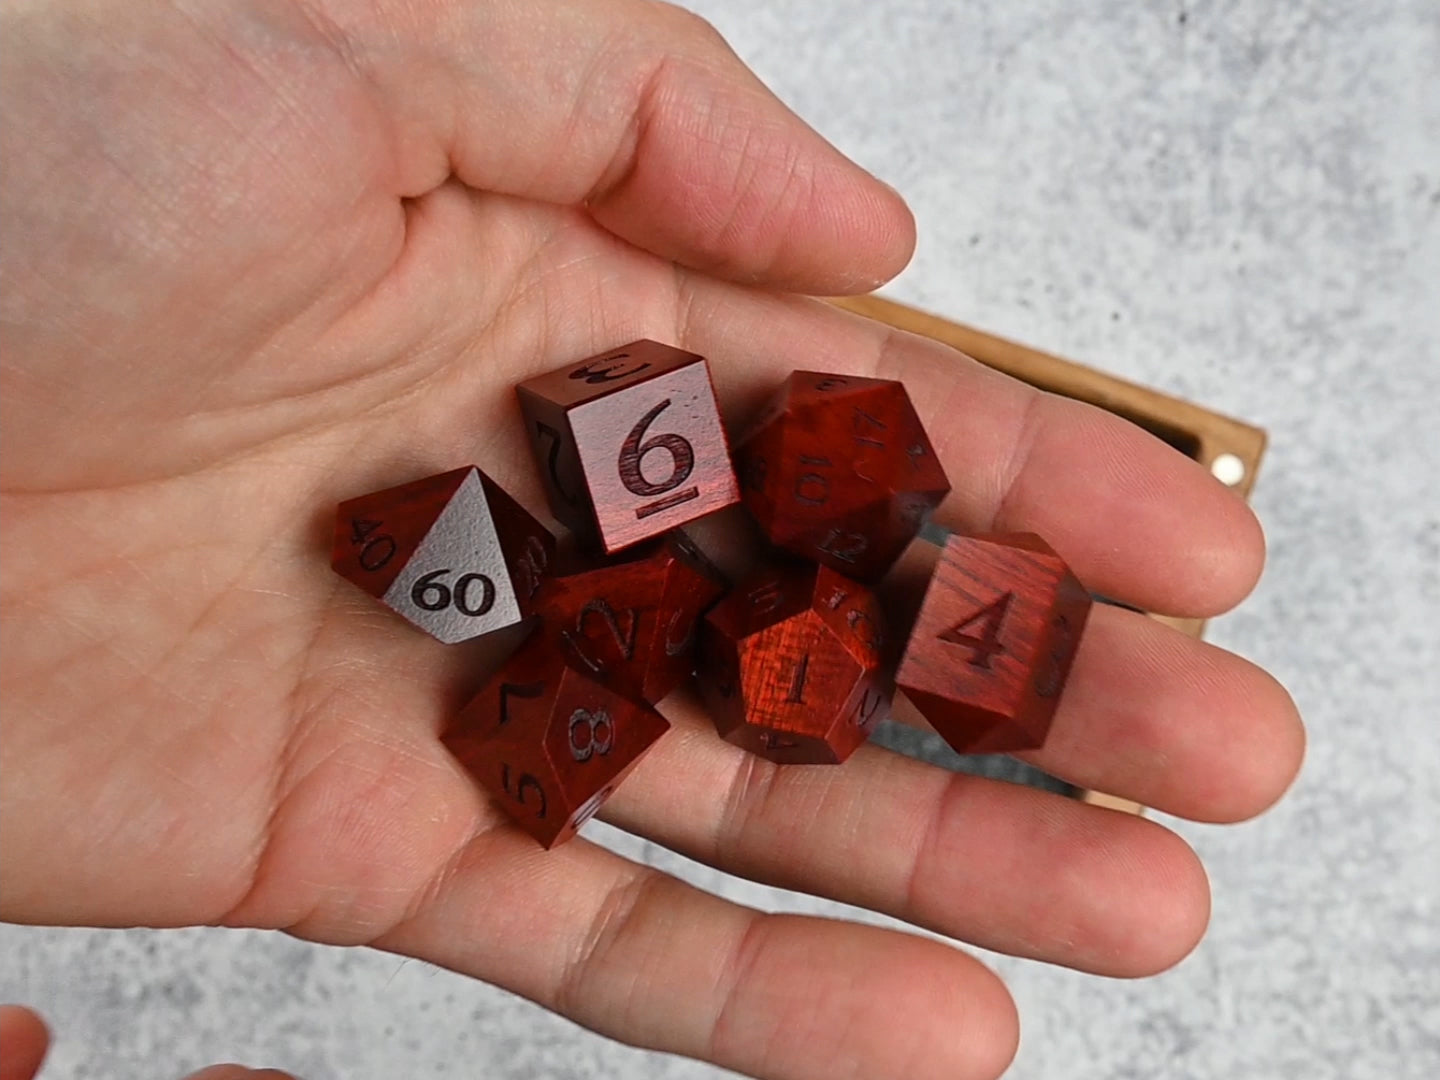 Video of Bloodwood dice set being rolled into a Delver's Kit Dice Box and Tray for dungeons & dragons tabletop roleplaying game